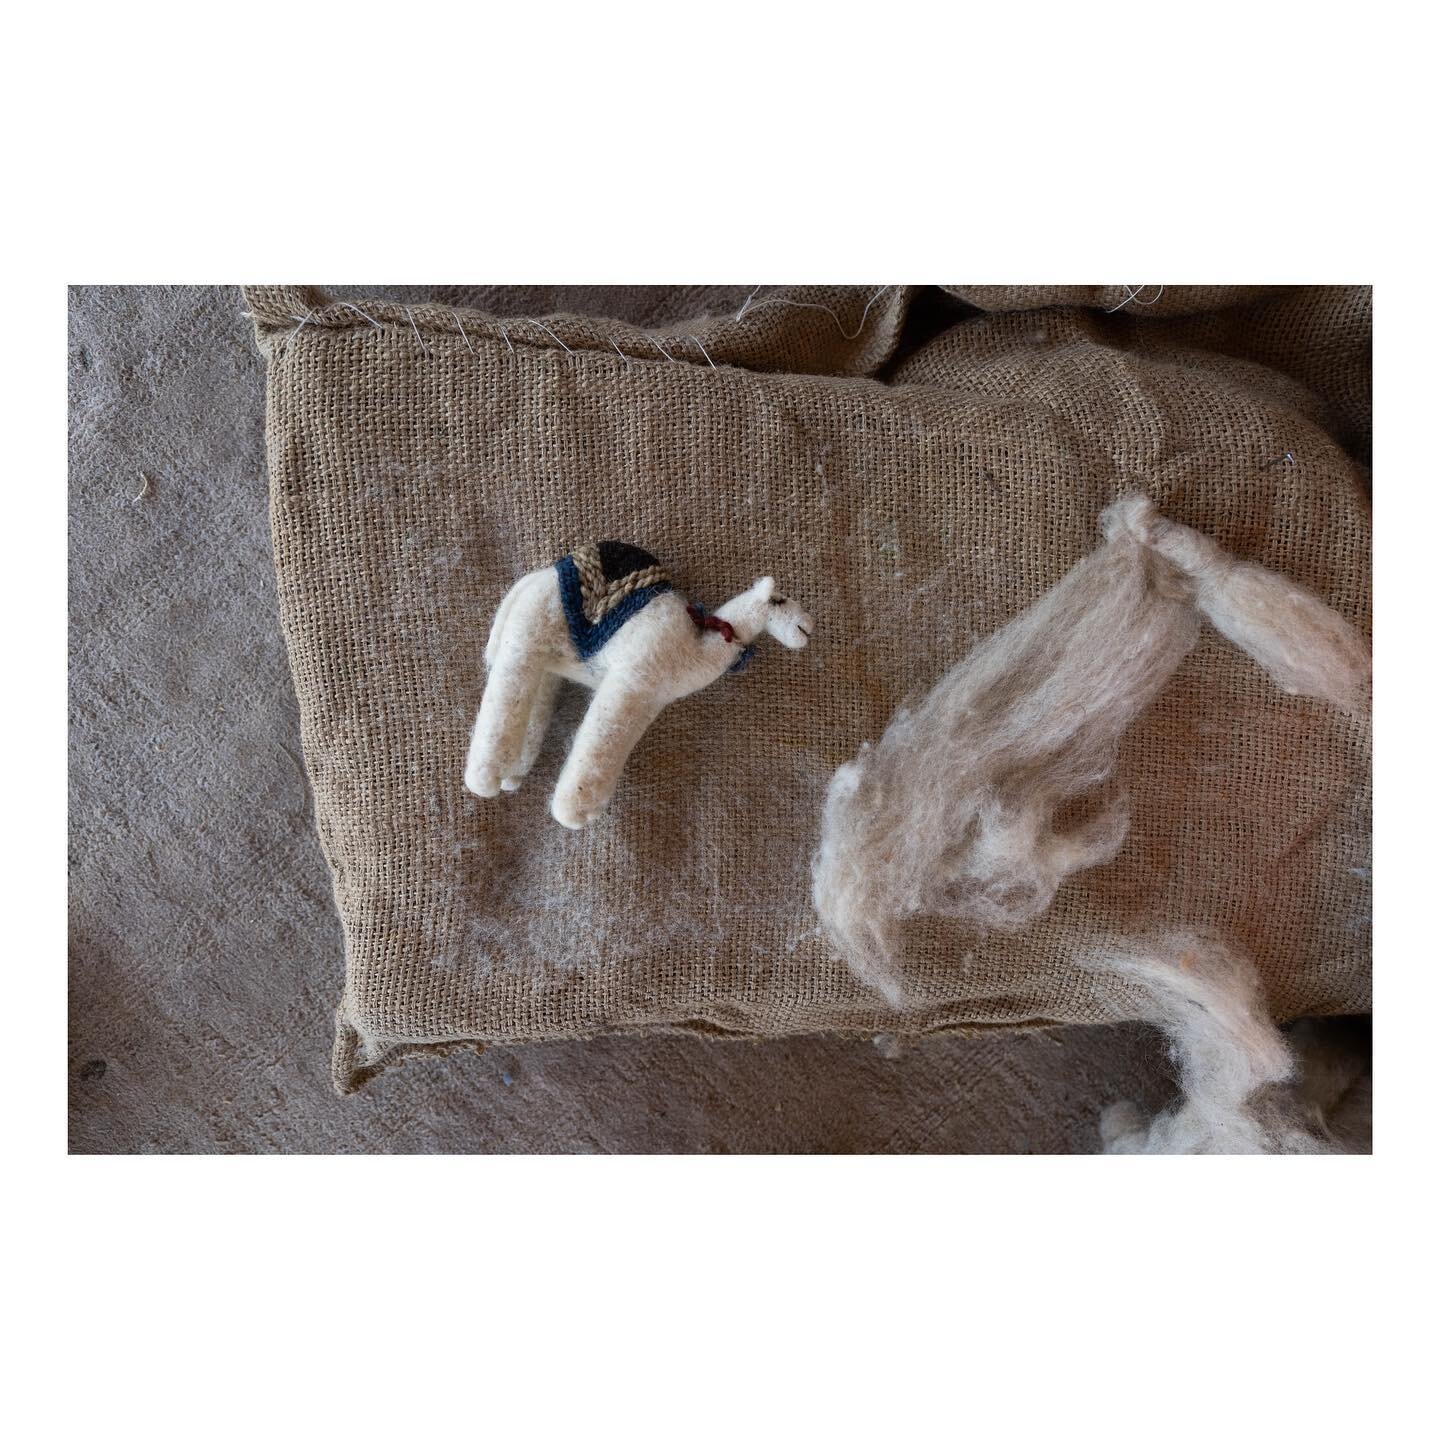 A peek at some of the adorable felted animals made by Bedouin women living in the West Bank. Living conditions are extremely harsh but their resilience to live off the land and find creative ways to make a bit of income is incredibly inspiring. Women